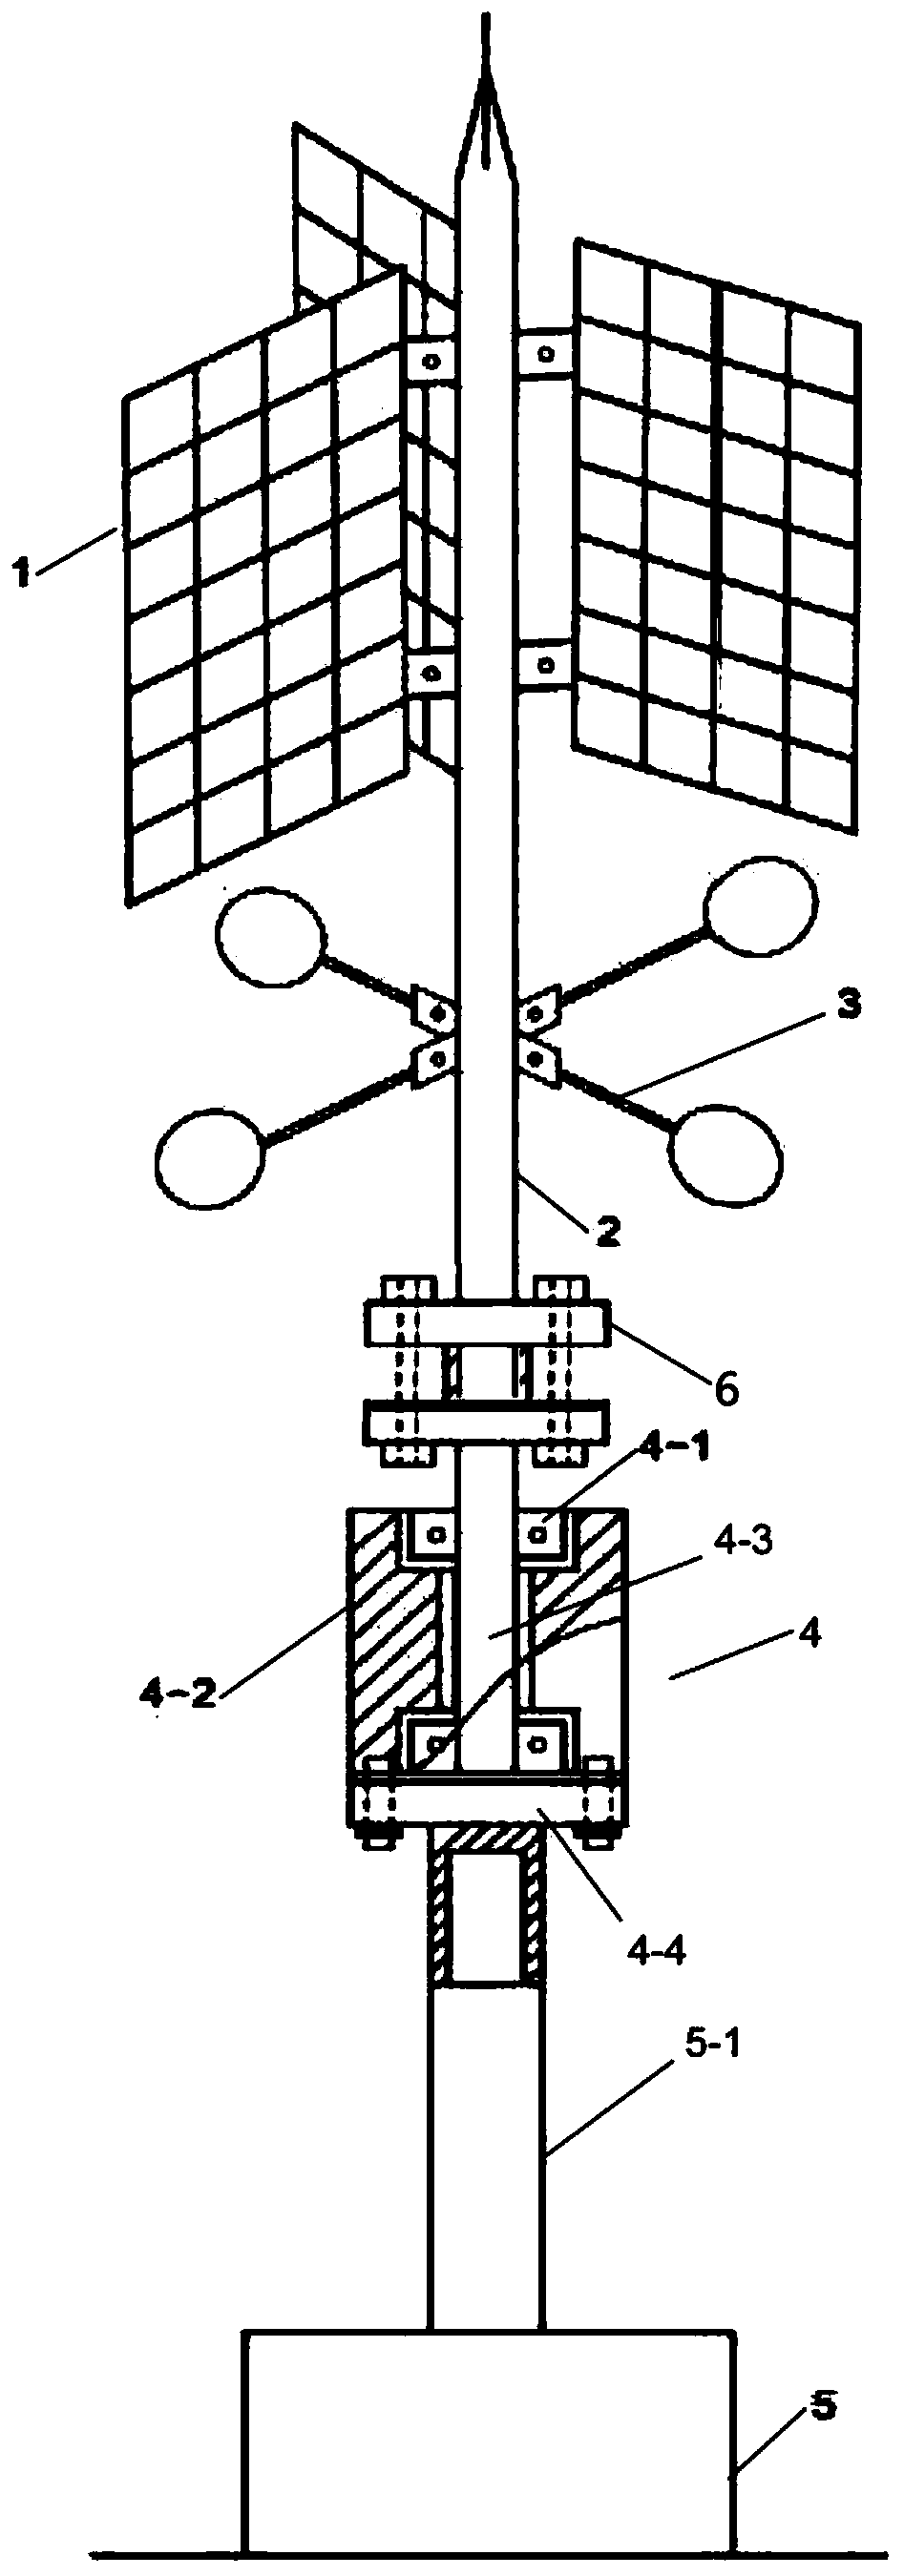 Lightning protection and elimination device for oil well platform